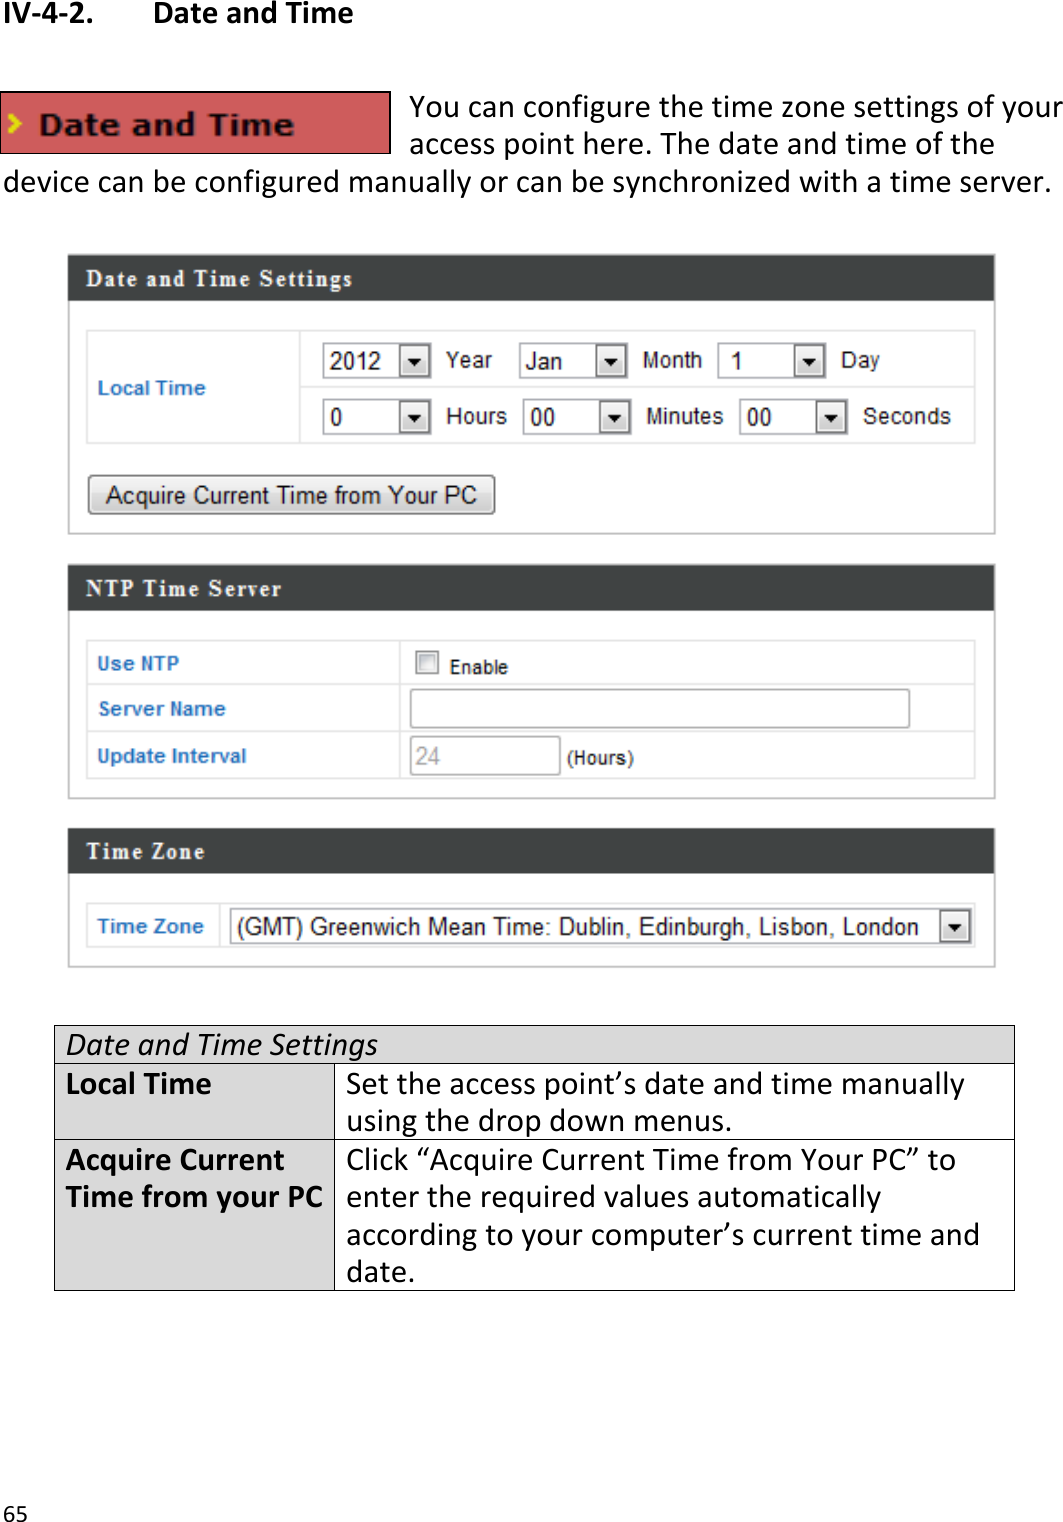 65  IV-4-2.   Date and Time  You can configure the time zone settings of your access point here. The date and time of the device can be configured manually or can be synchronized with a time server.    Date and Time Settings Local Time Set the access point’s date and time manually using the drop down menus. Acquire Current Time from your PC Click “Acquire Current Time from Your PC” to enter the required values automatically according to your computer’s current time and date.      